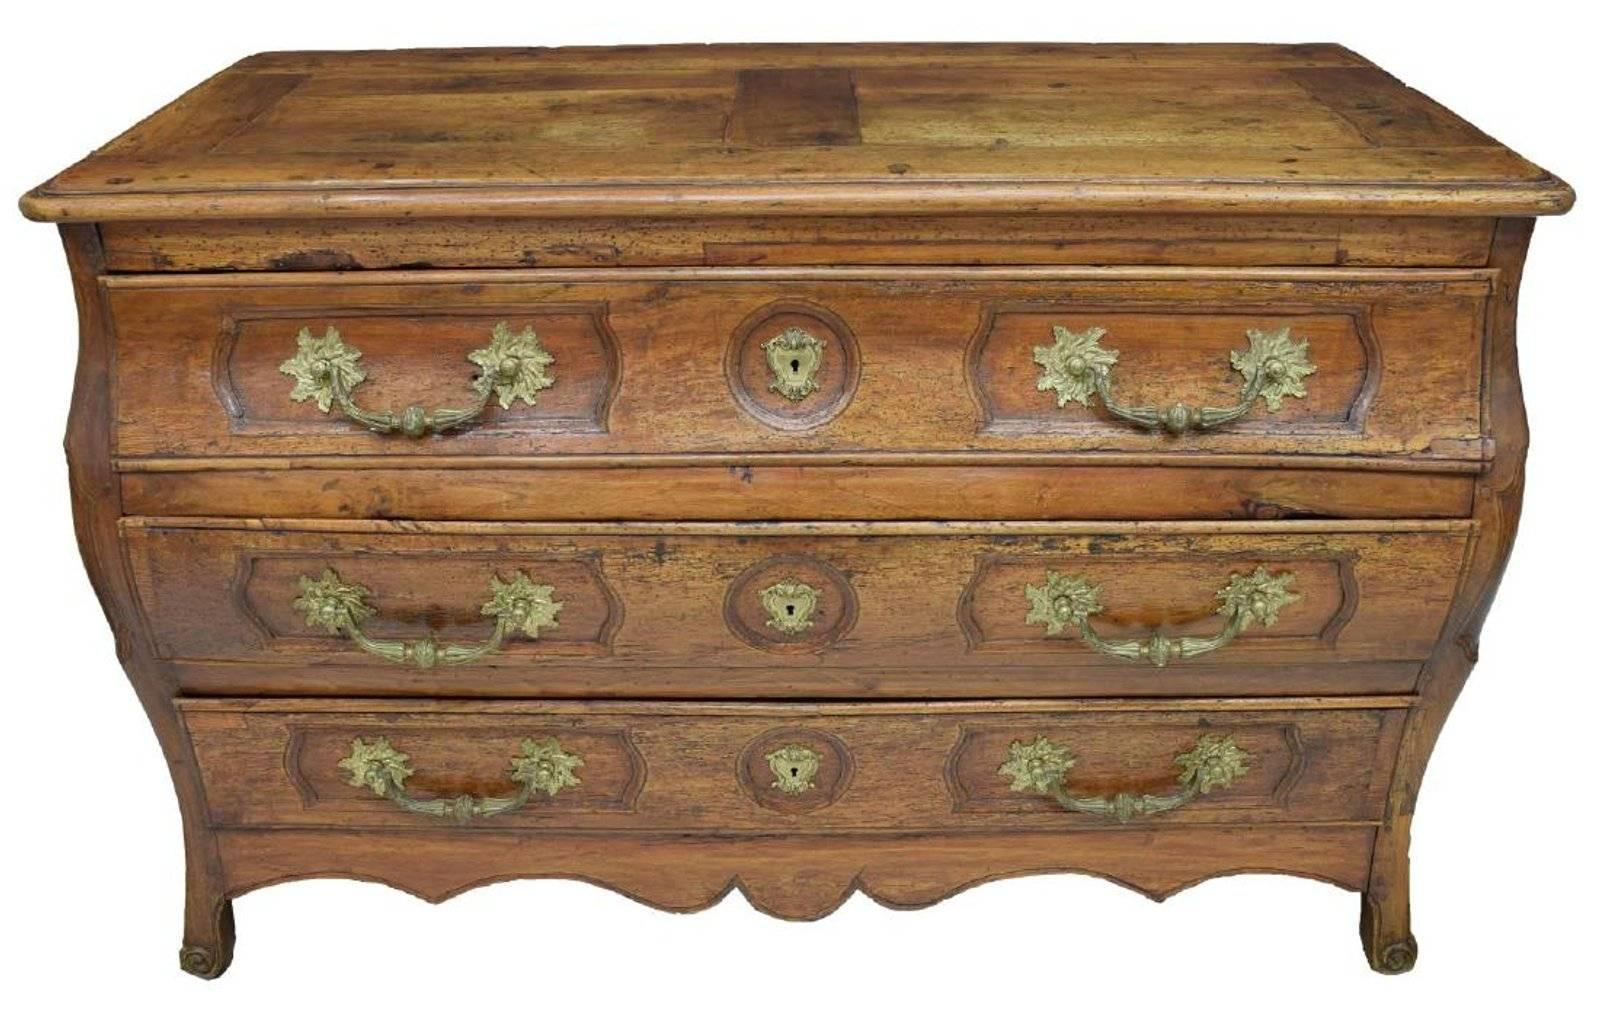 Beautiful 18th century French Louis XIV bombe chest with paneled top over three drawers rising on scroll foot legs. Wear consistent with age.